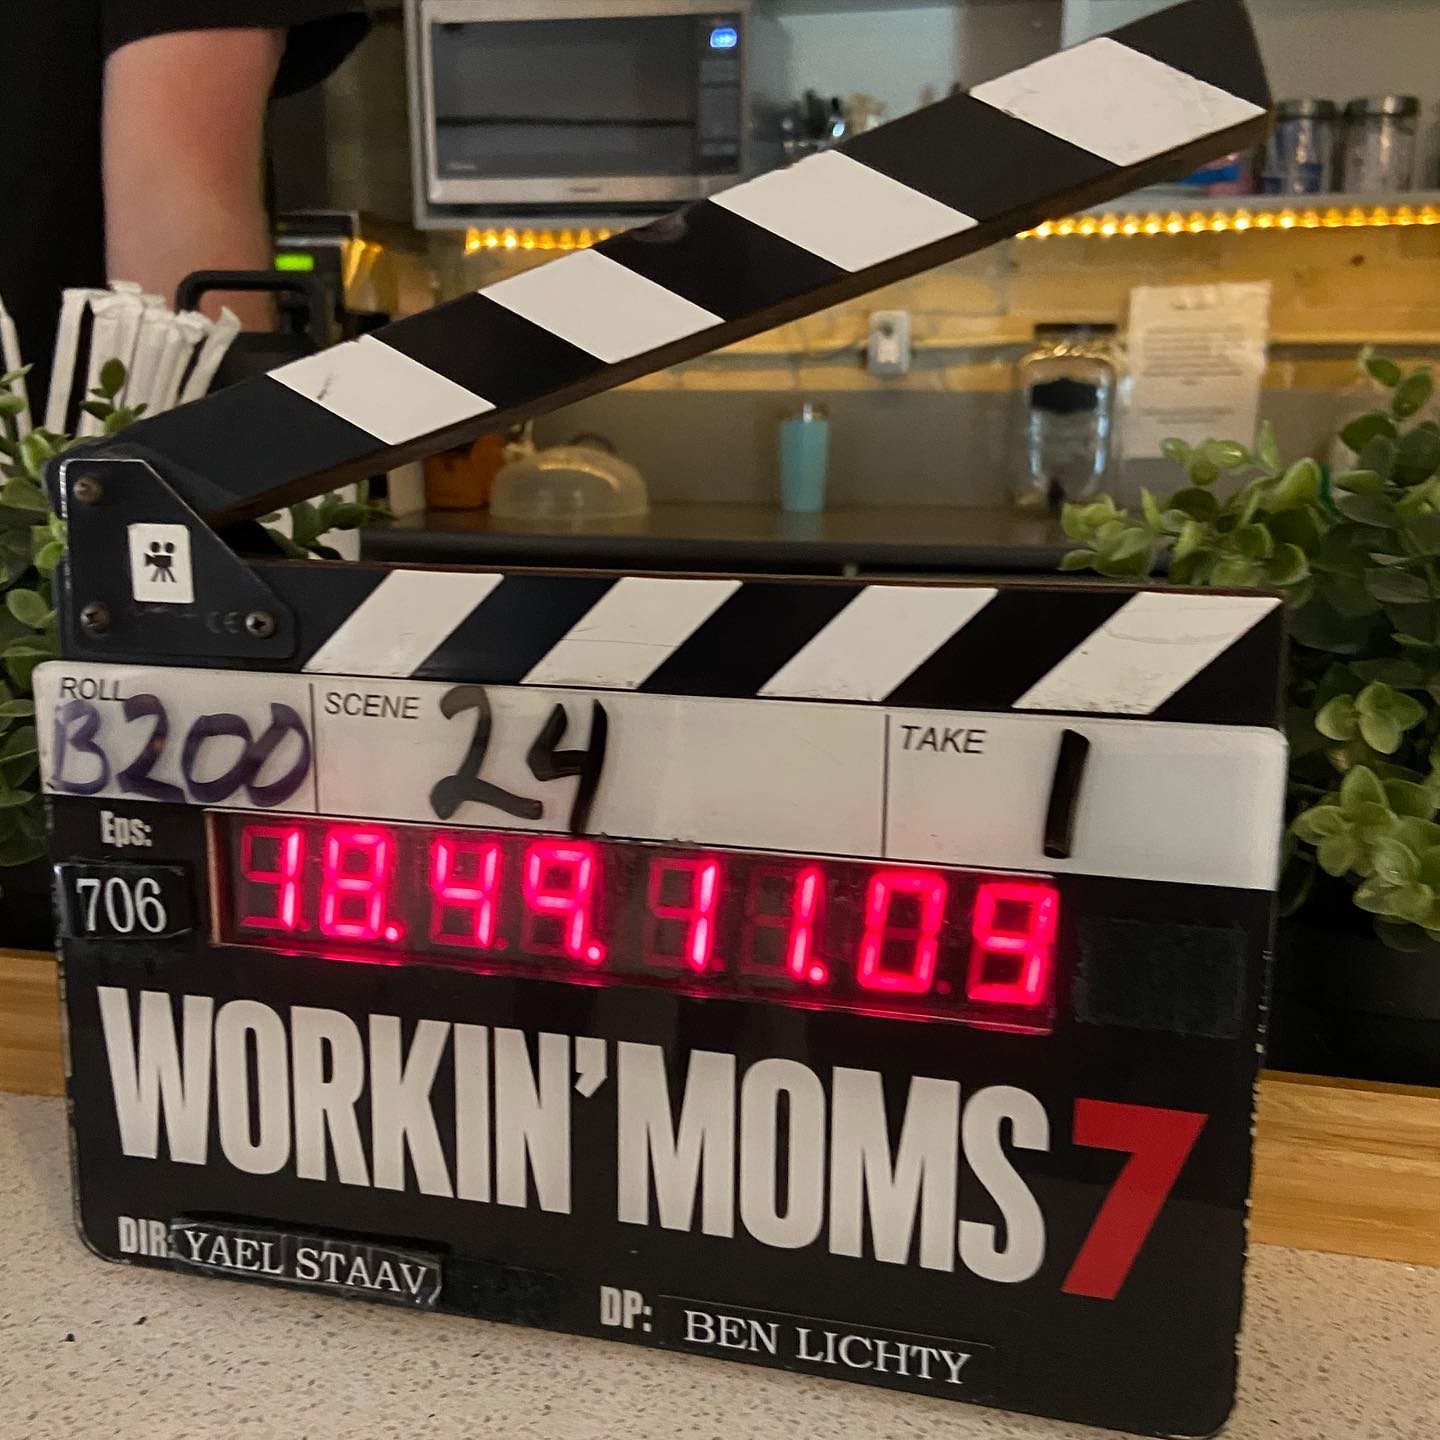 Movie clapper of the Workin' Moms seventh and final season